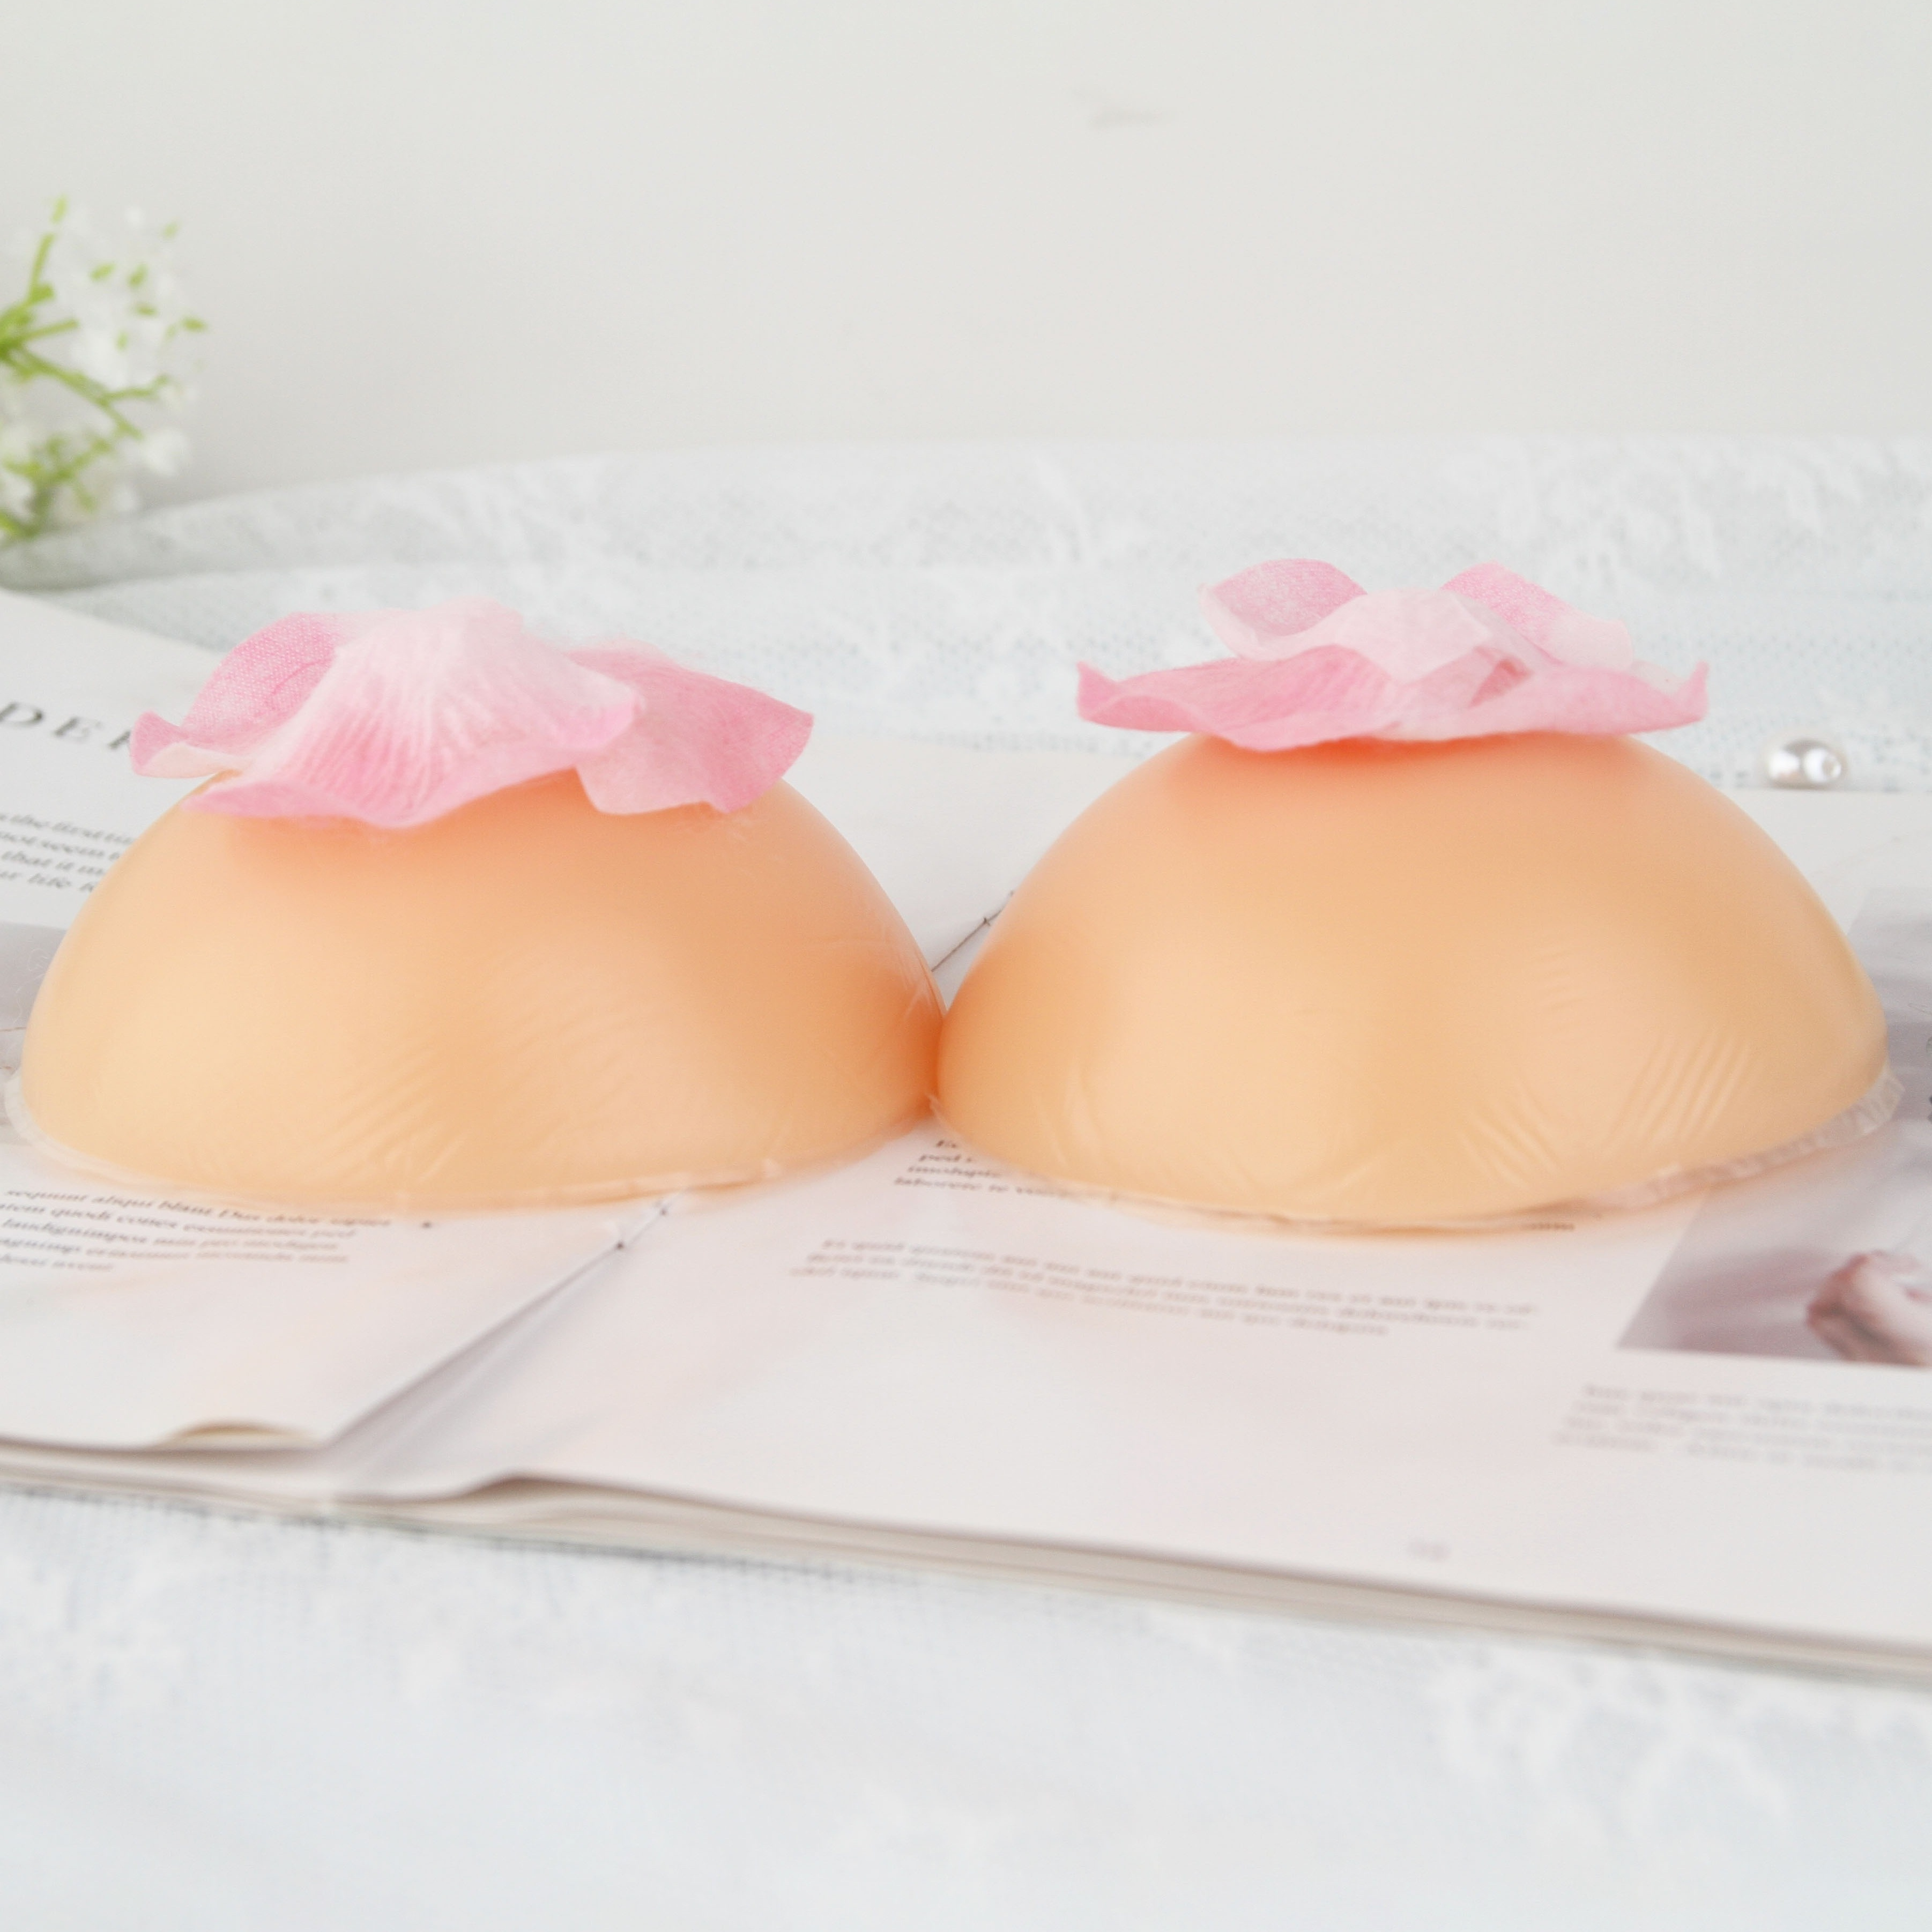 Realistic Breasts 1 Pair Fake Breasts Cosplay Silicone Breast